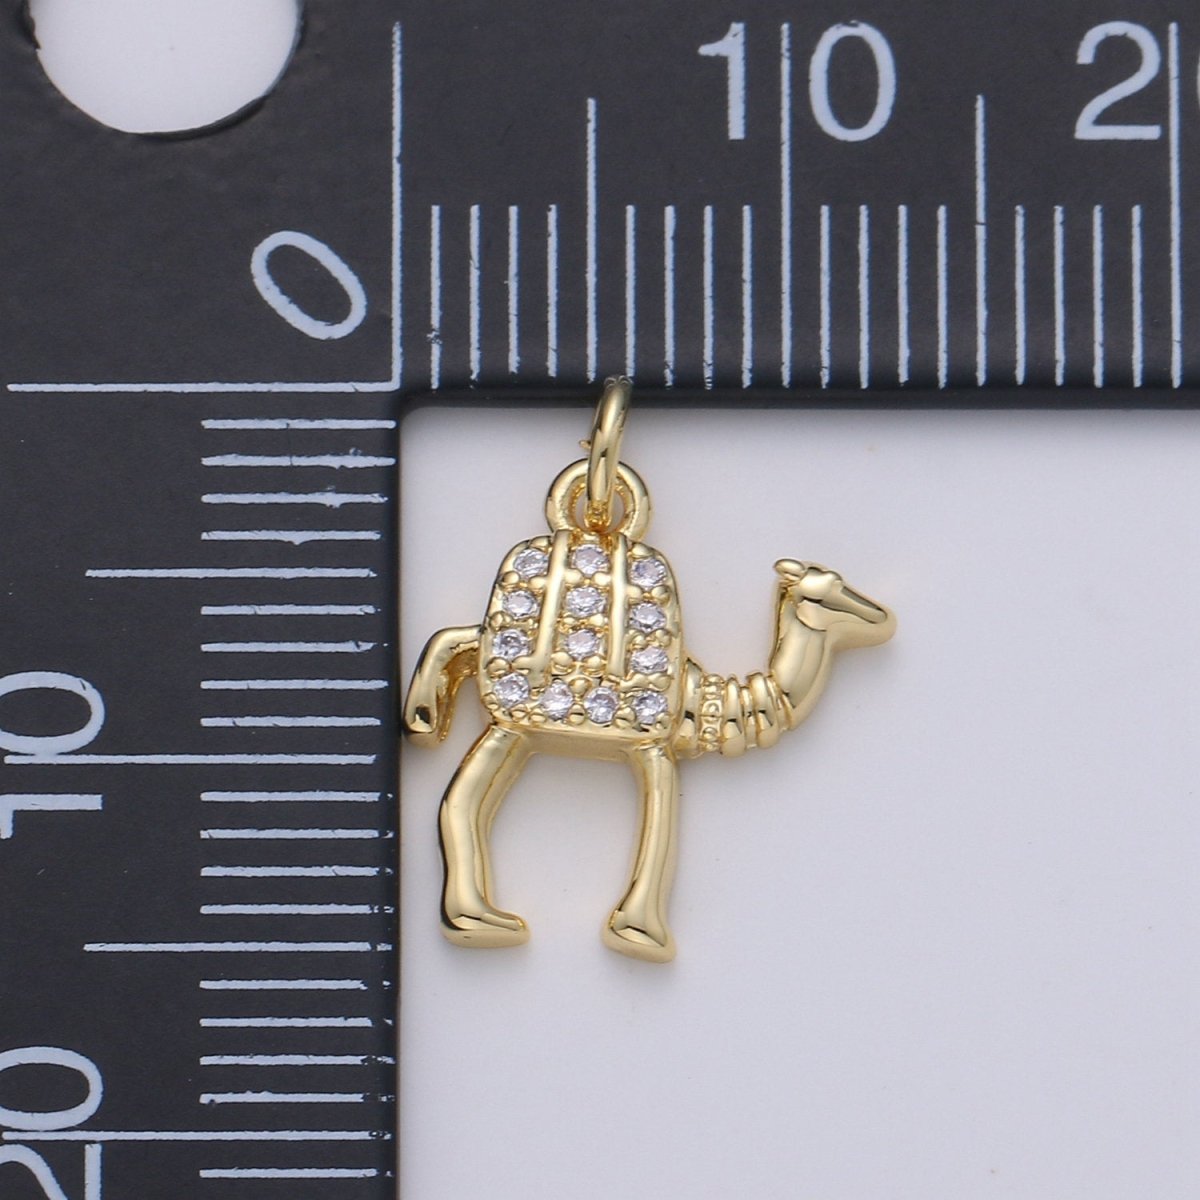 Gold Camel Charm - 14k Gold Filled Camel Pendant - Arabian Desert Charms - Animal Jewelry for Bracelet Necklace Earring Component D-644 - DLUXCA